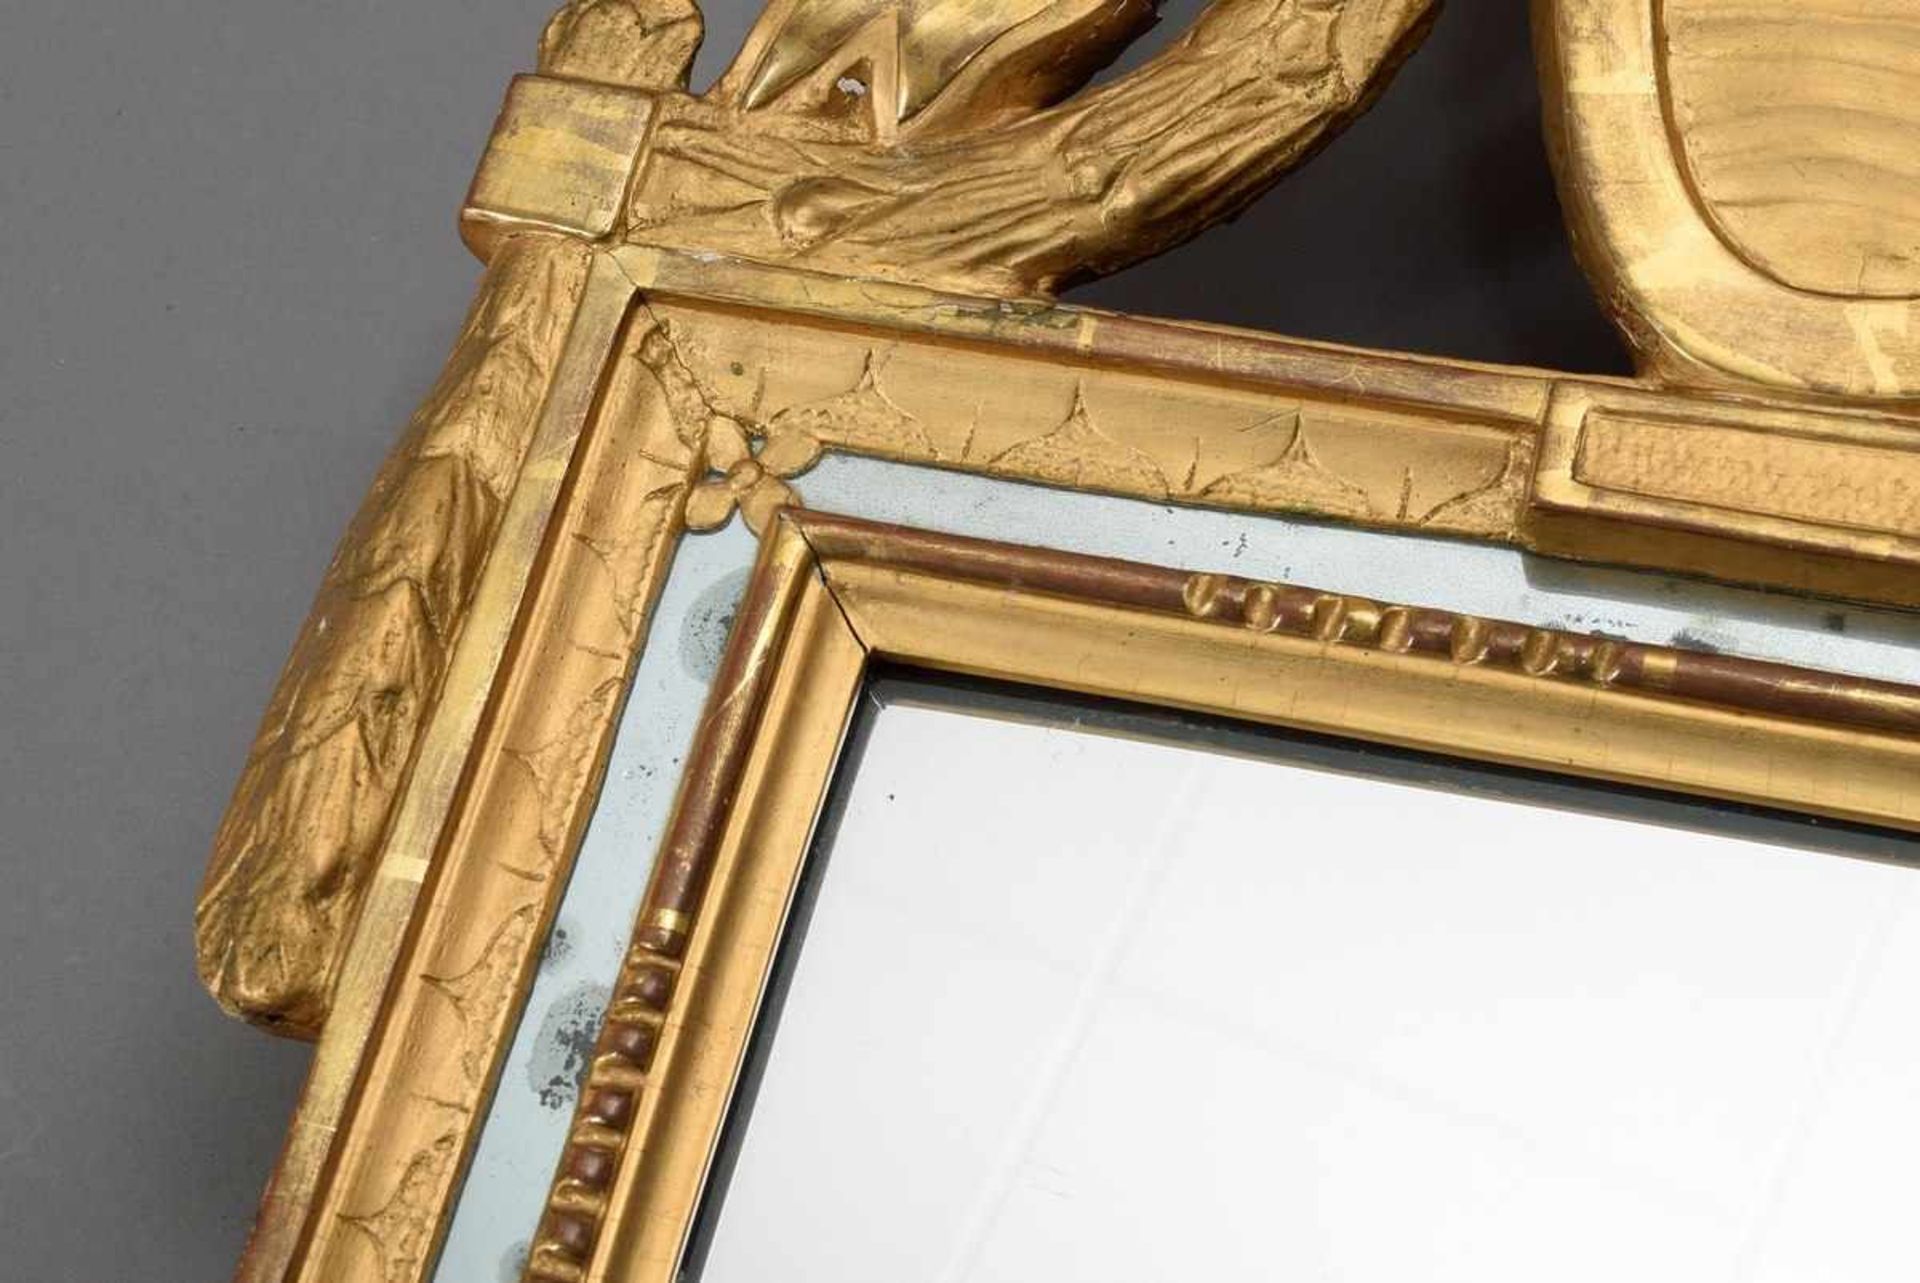 Louis XVI mirror with big loop crown, festoon pendants and mirrored frame, wood carved and gilded, - Image 3 of 5